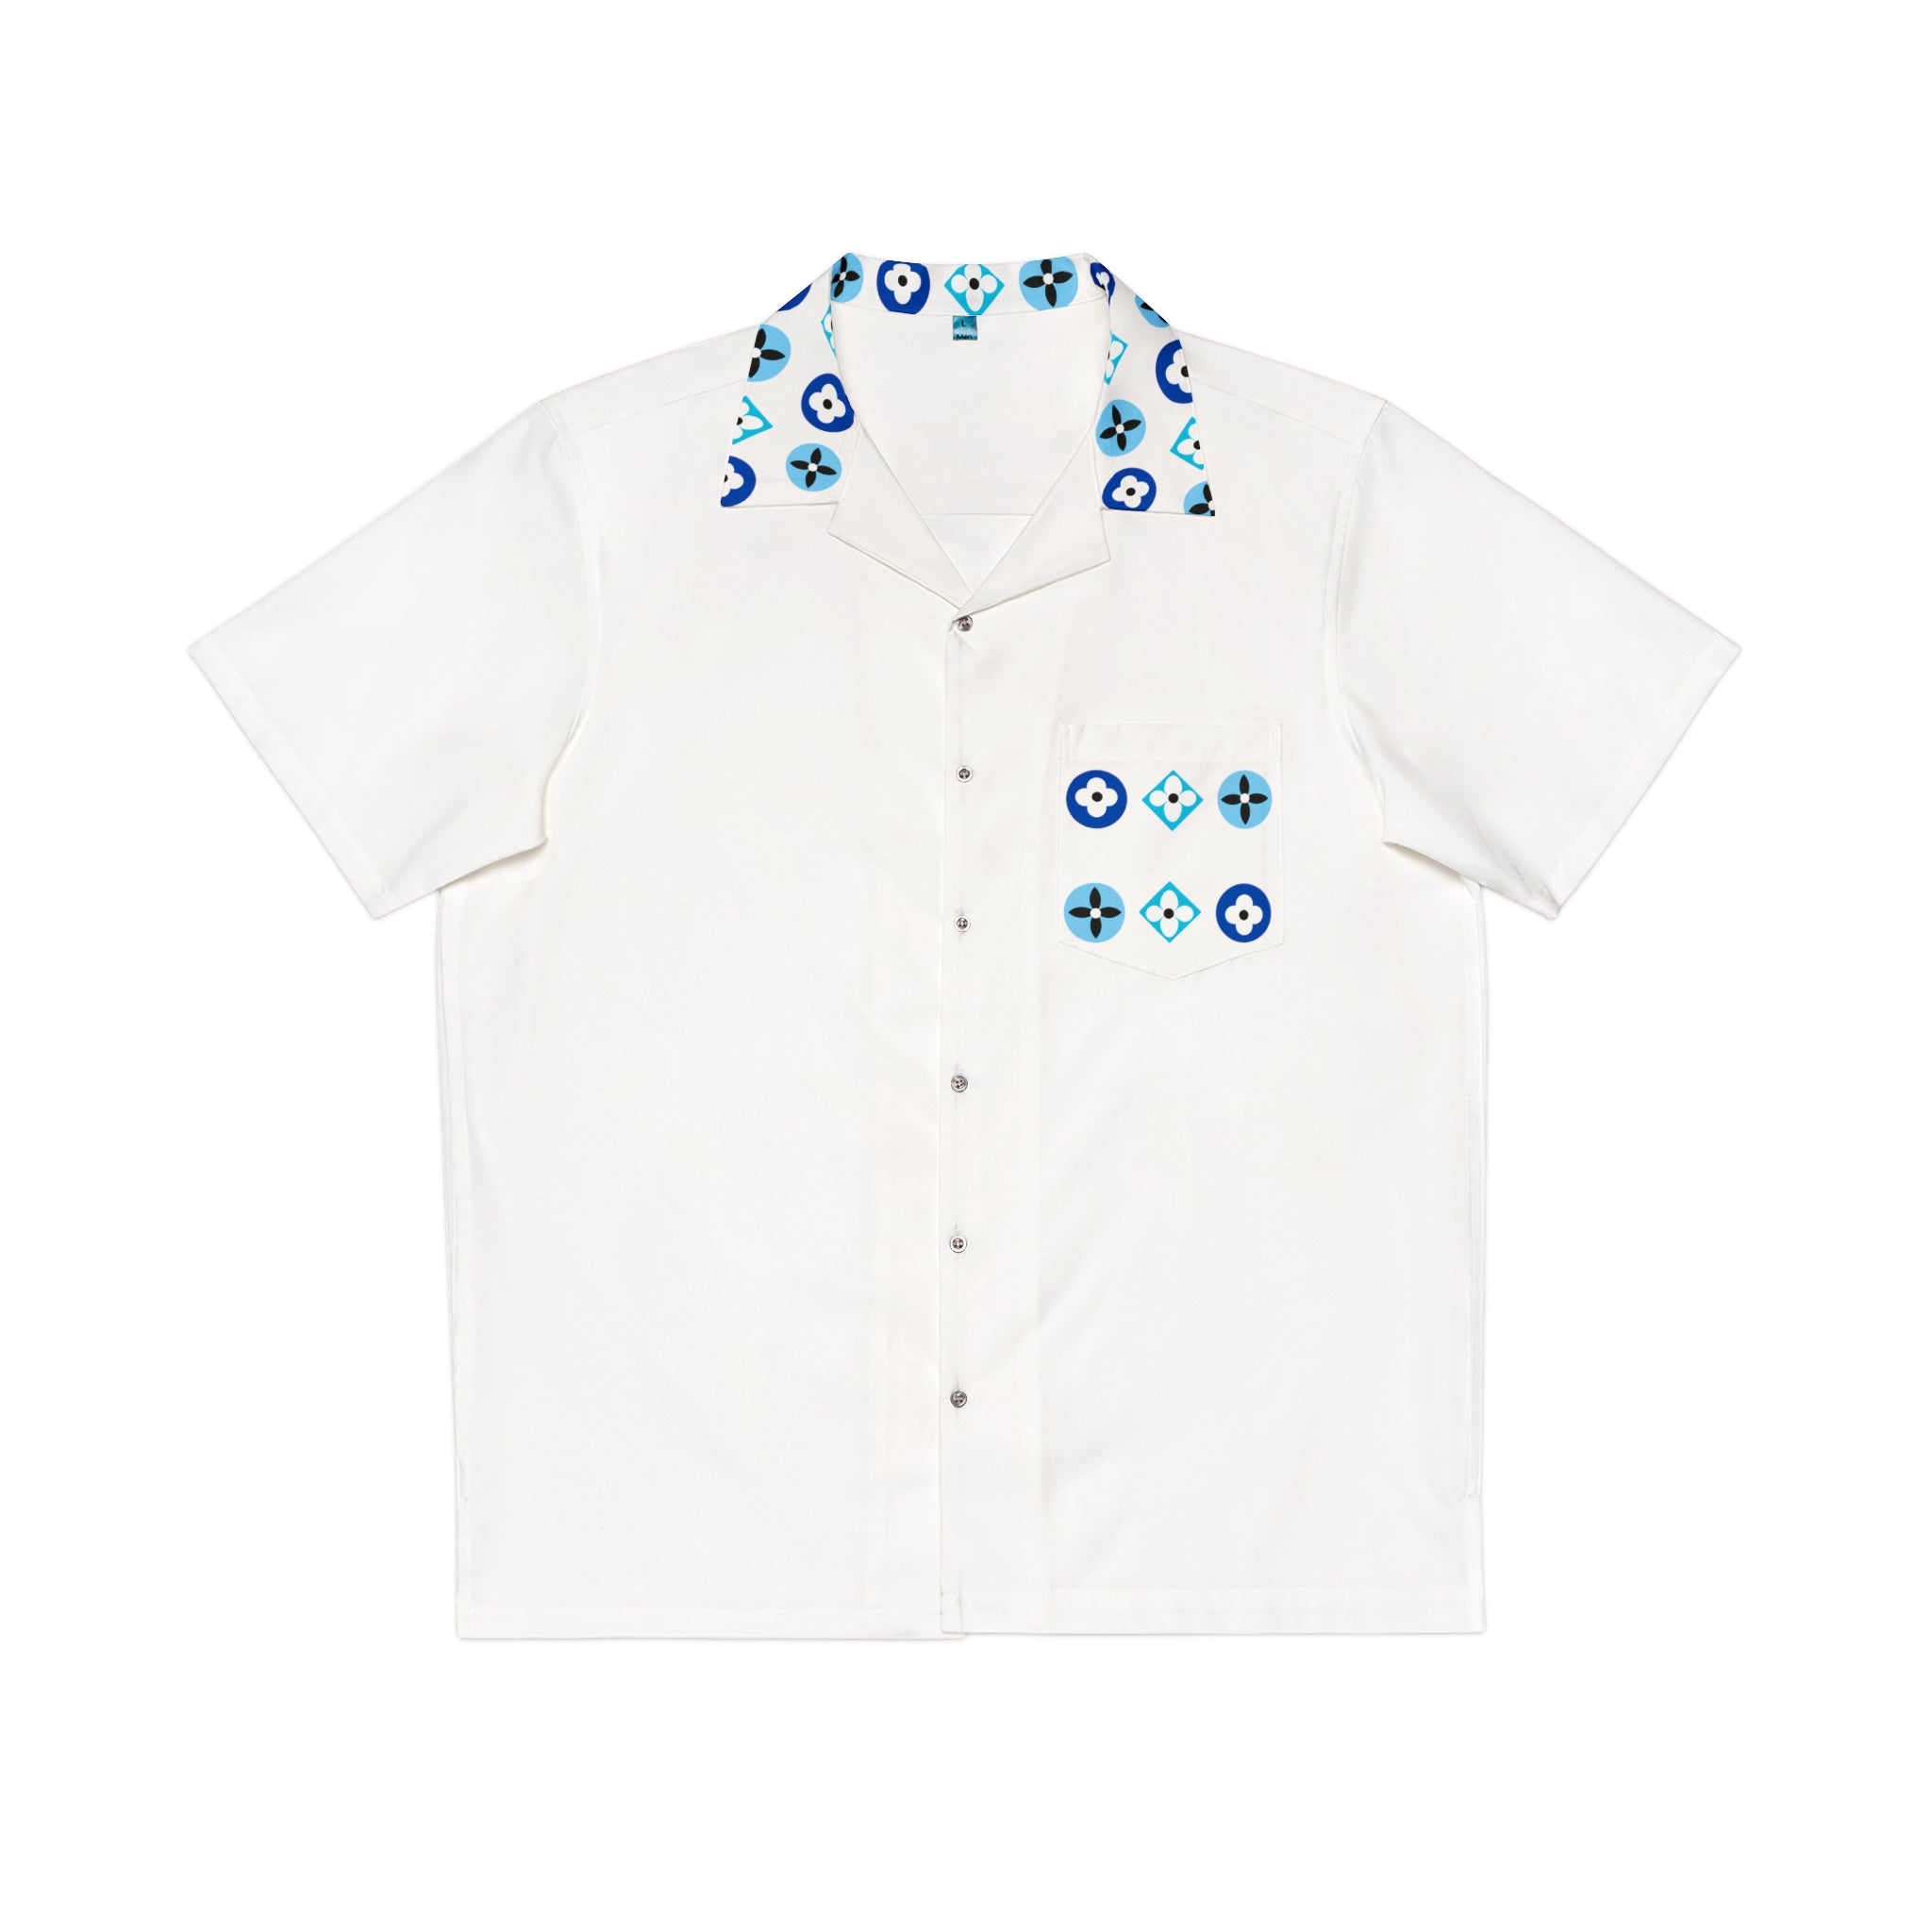  Groove Collection Trilogy of Icons Pocket Grid (Blues) White Unisex Gender Neutral Button Up Shirt, Hawaiian Shirt Shirts5XLWhite